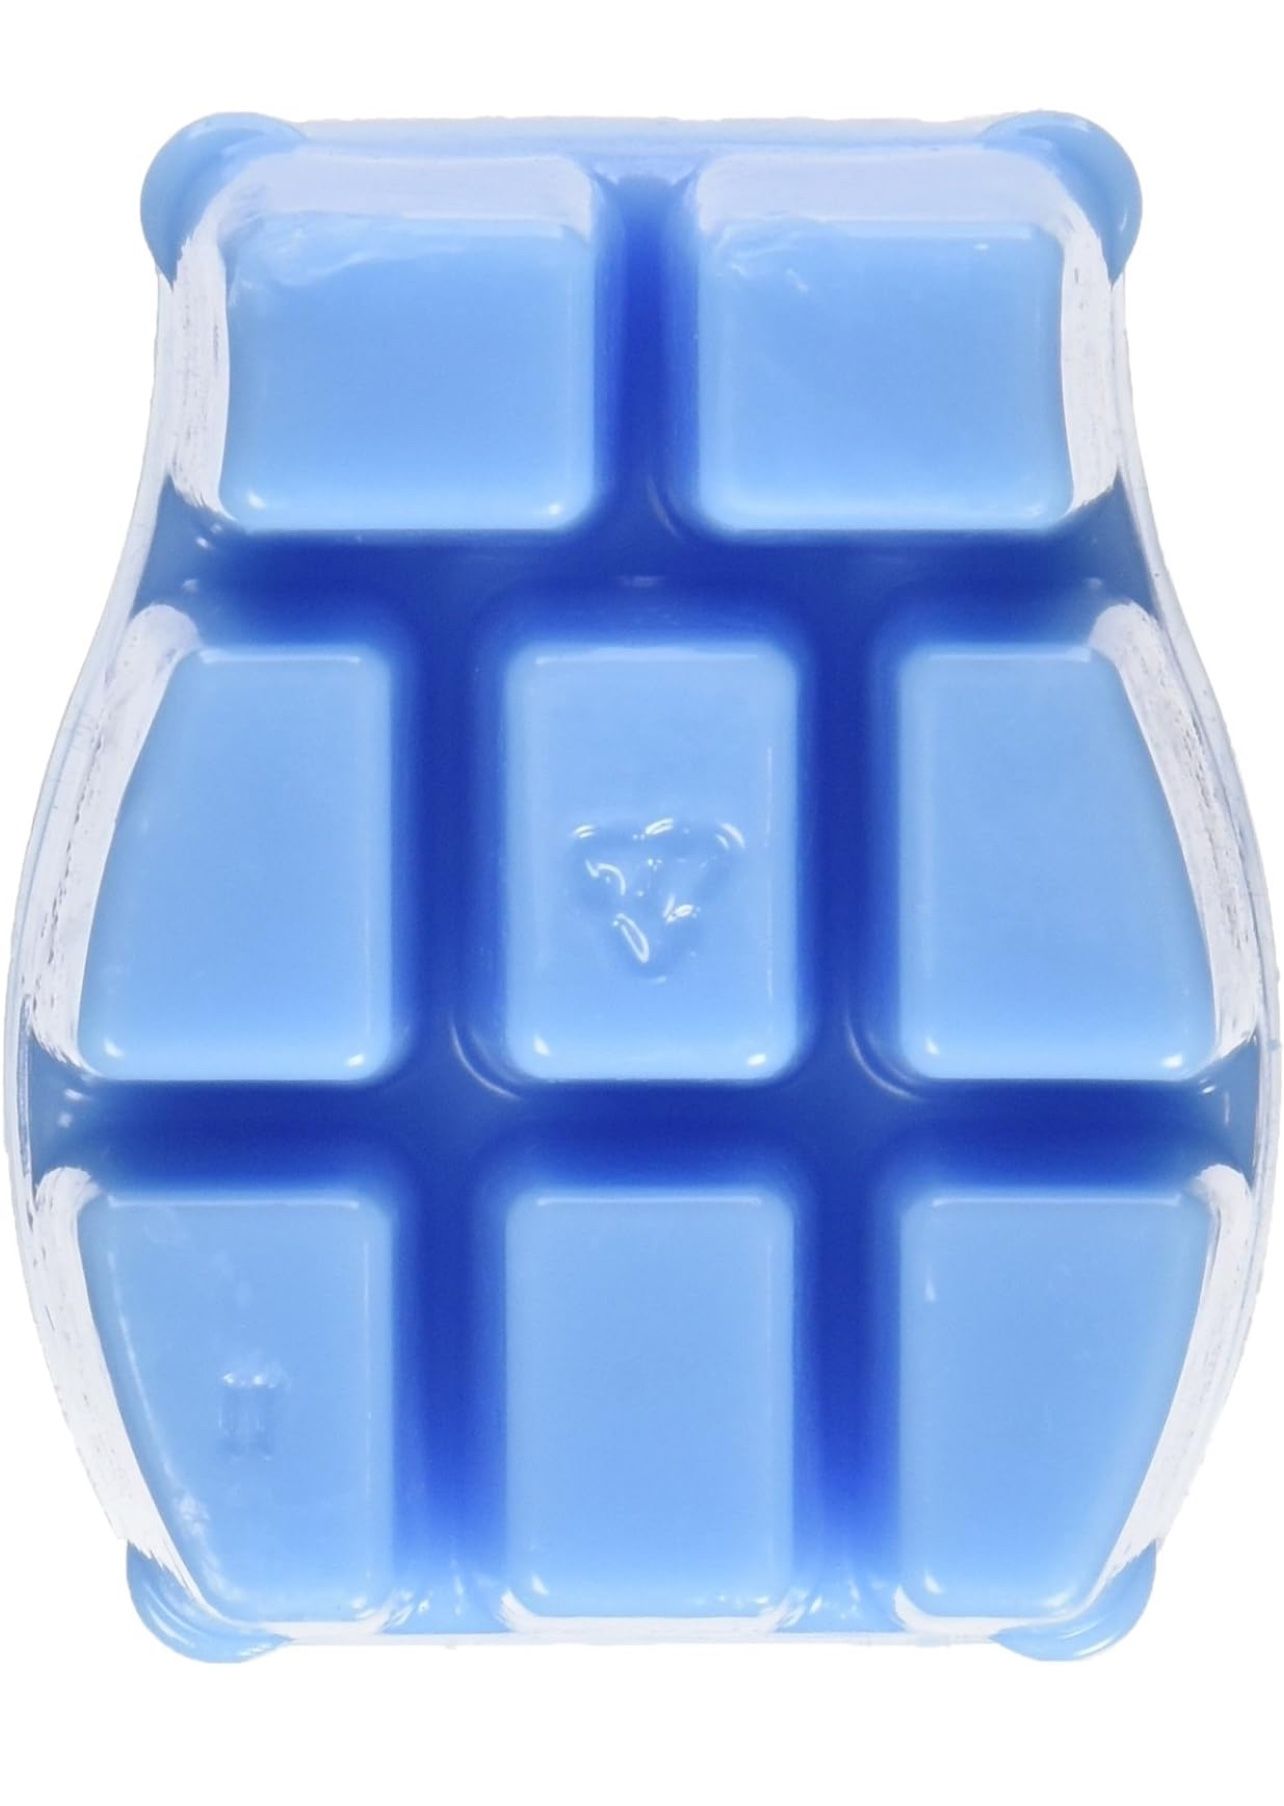 Variety, Wickless Candles - Scentsy Wax Bars (Melts)